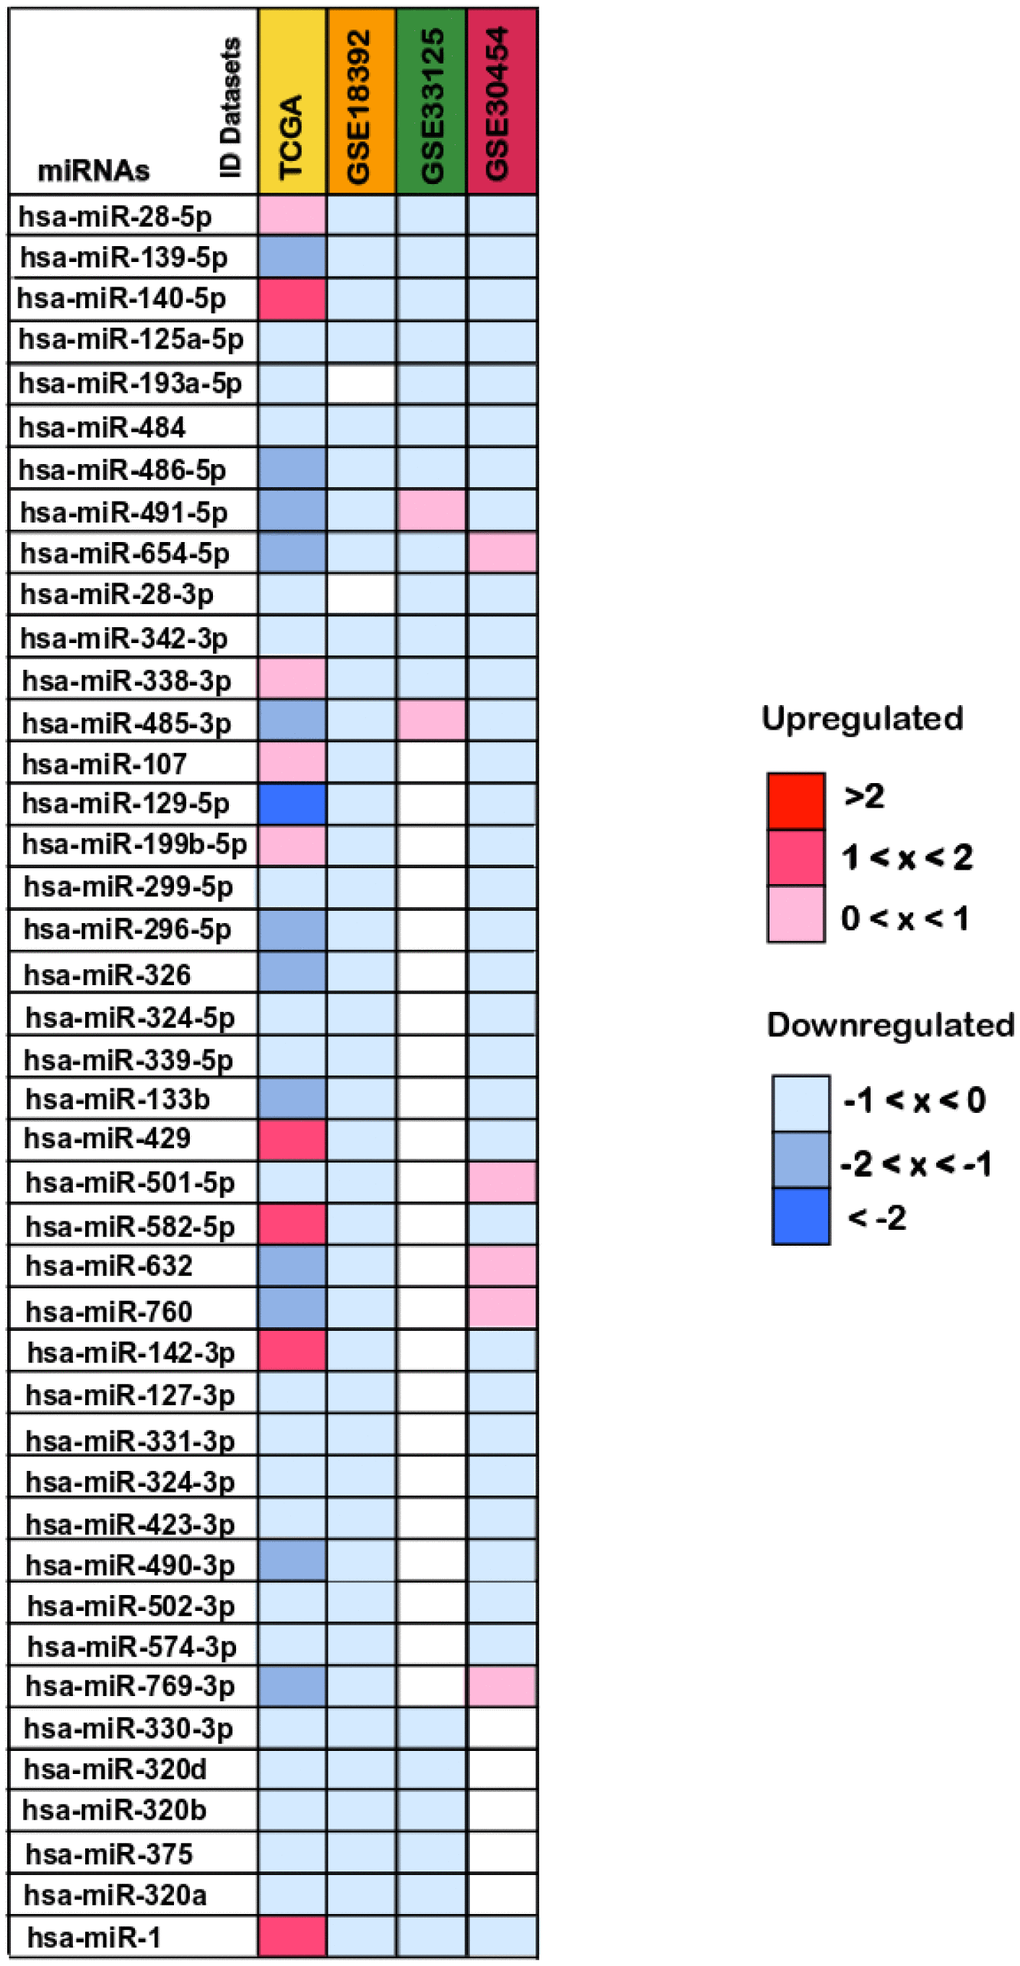 Differentially expressed miRNAs between colorectal cancer and normal tissue samples. The log2(FC) values calculated for each dataset are reported with red scale boxes for upregulated miRNAs and blue scale boxes for the downregulated miRNAs. White boxes represent the inexistence of the miRNA on the dataset. Only the miRNAs differentially expressed in at least 2 datasets while simultaneously being present in the TCGA dataset are displayed.